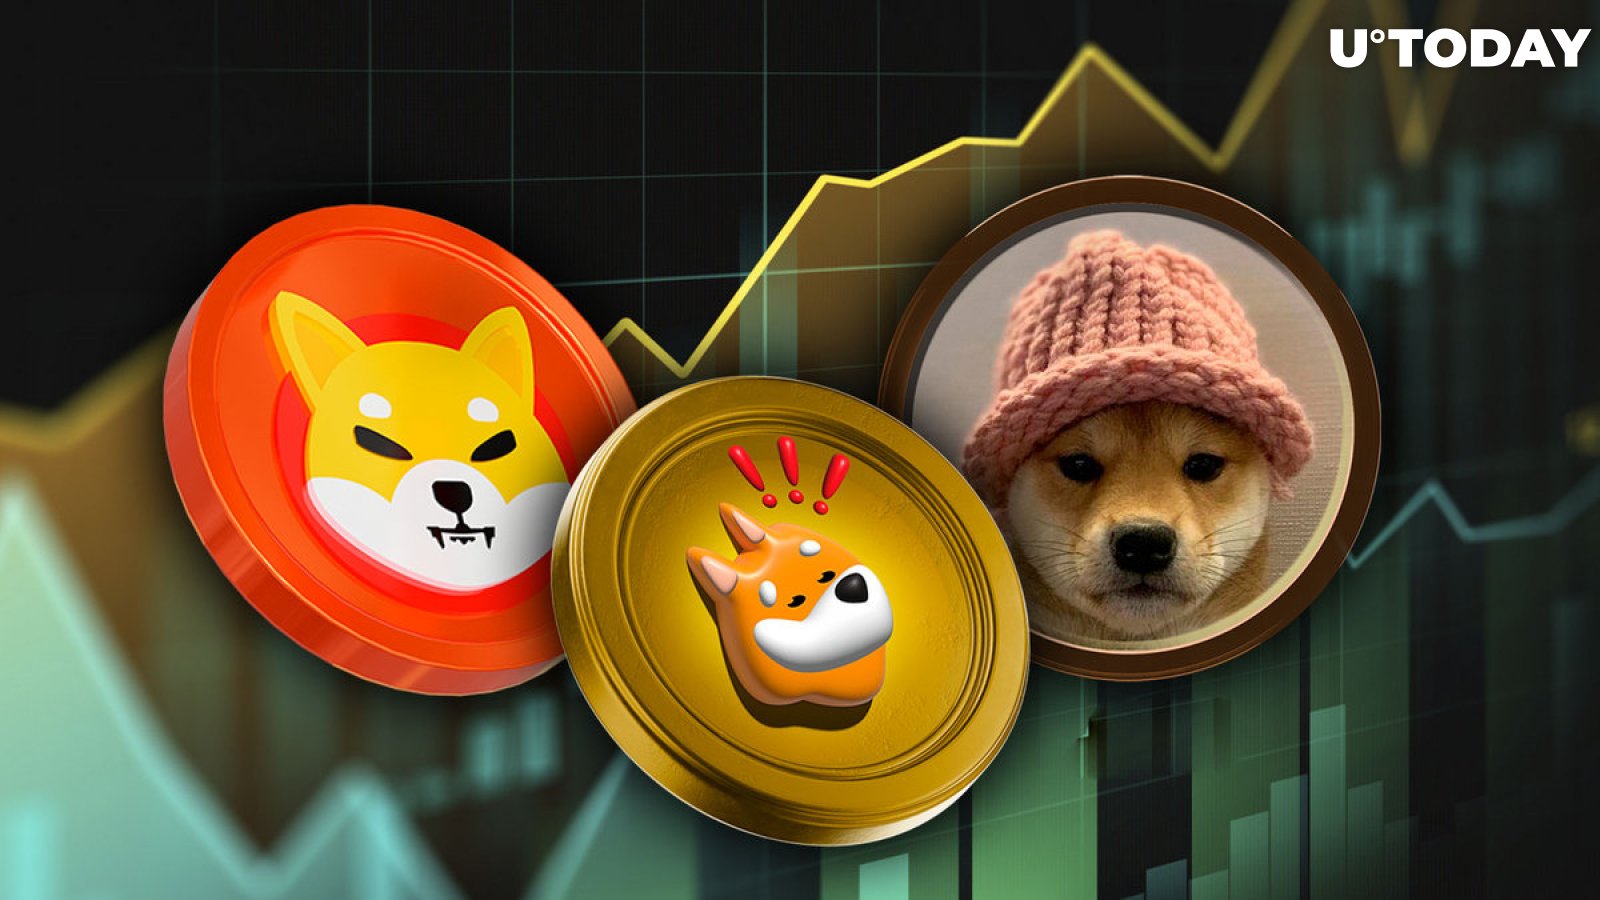 SHIB, BONK, WIF's Sudden Price Jumps; What's Behind Them?